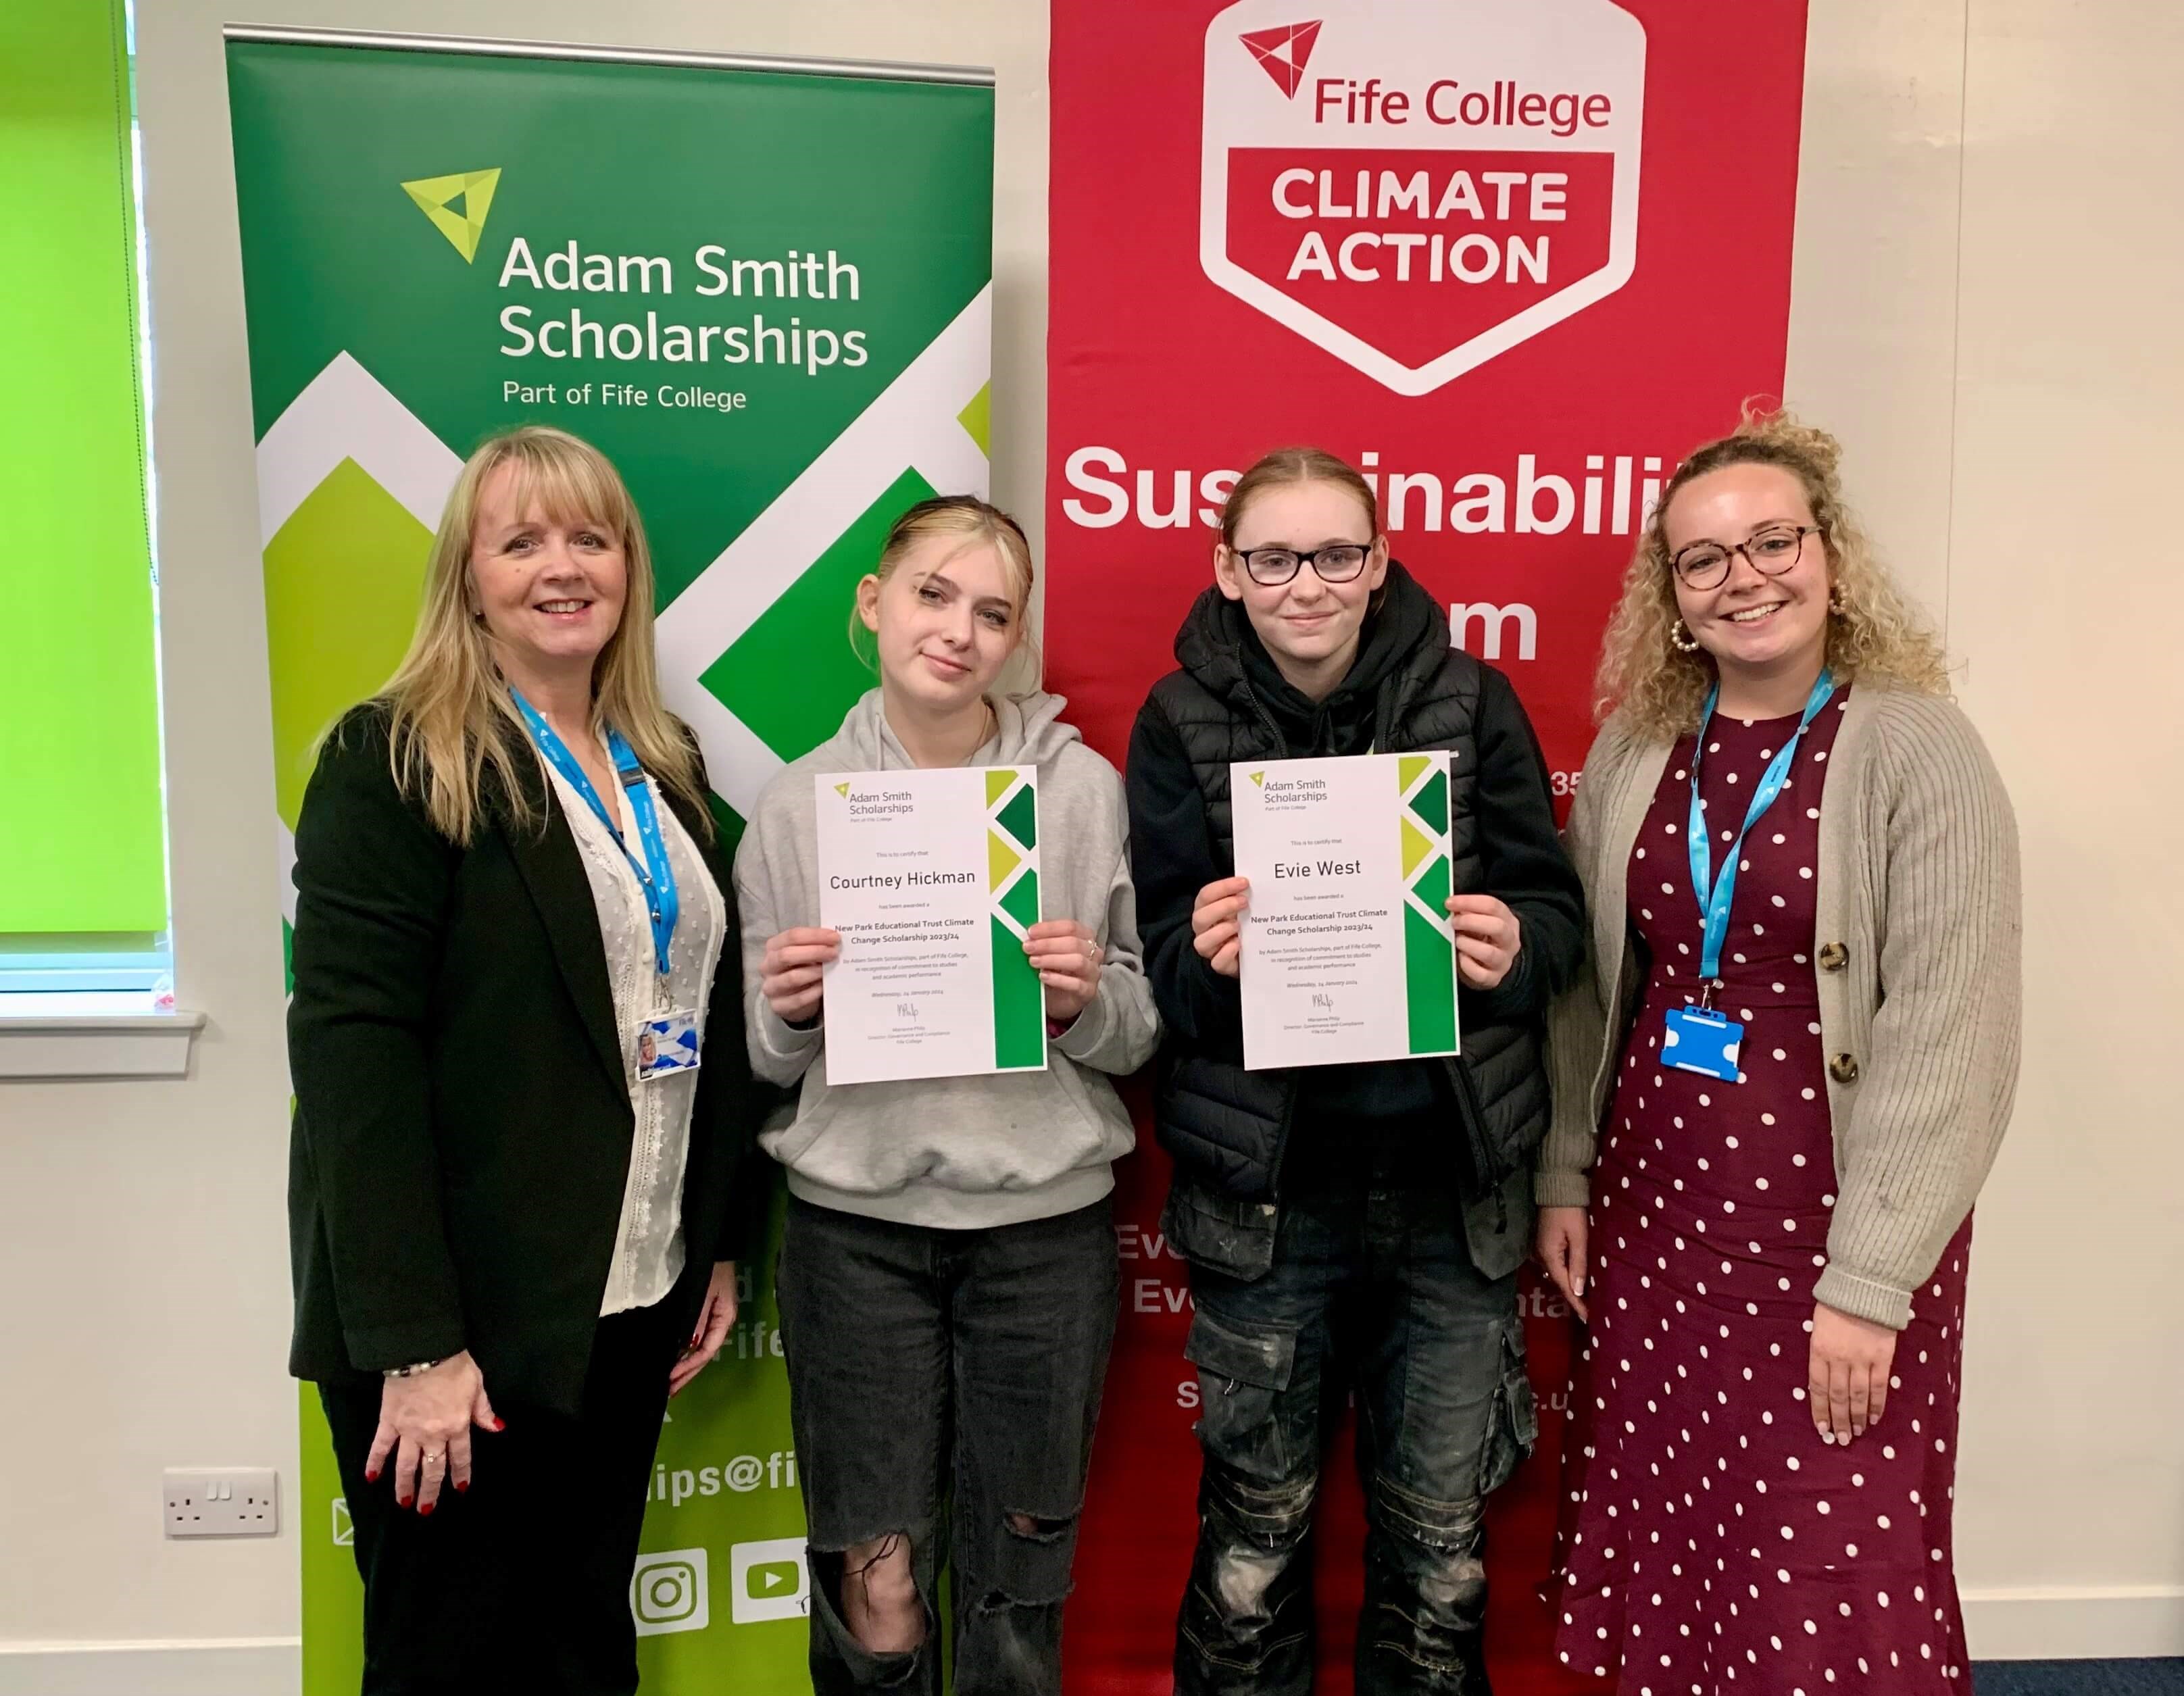 Students awarded scholarships for efforts to tackle climate change